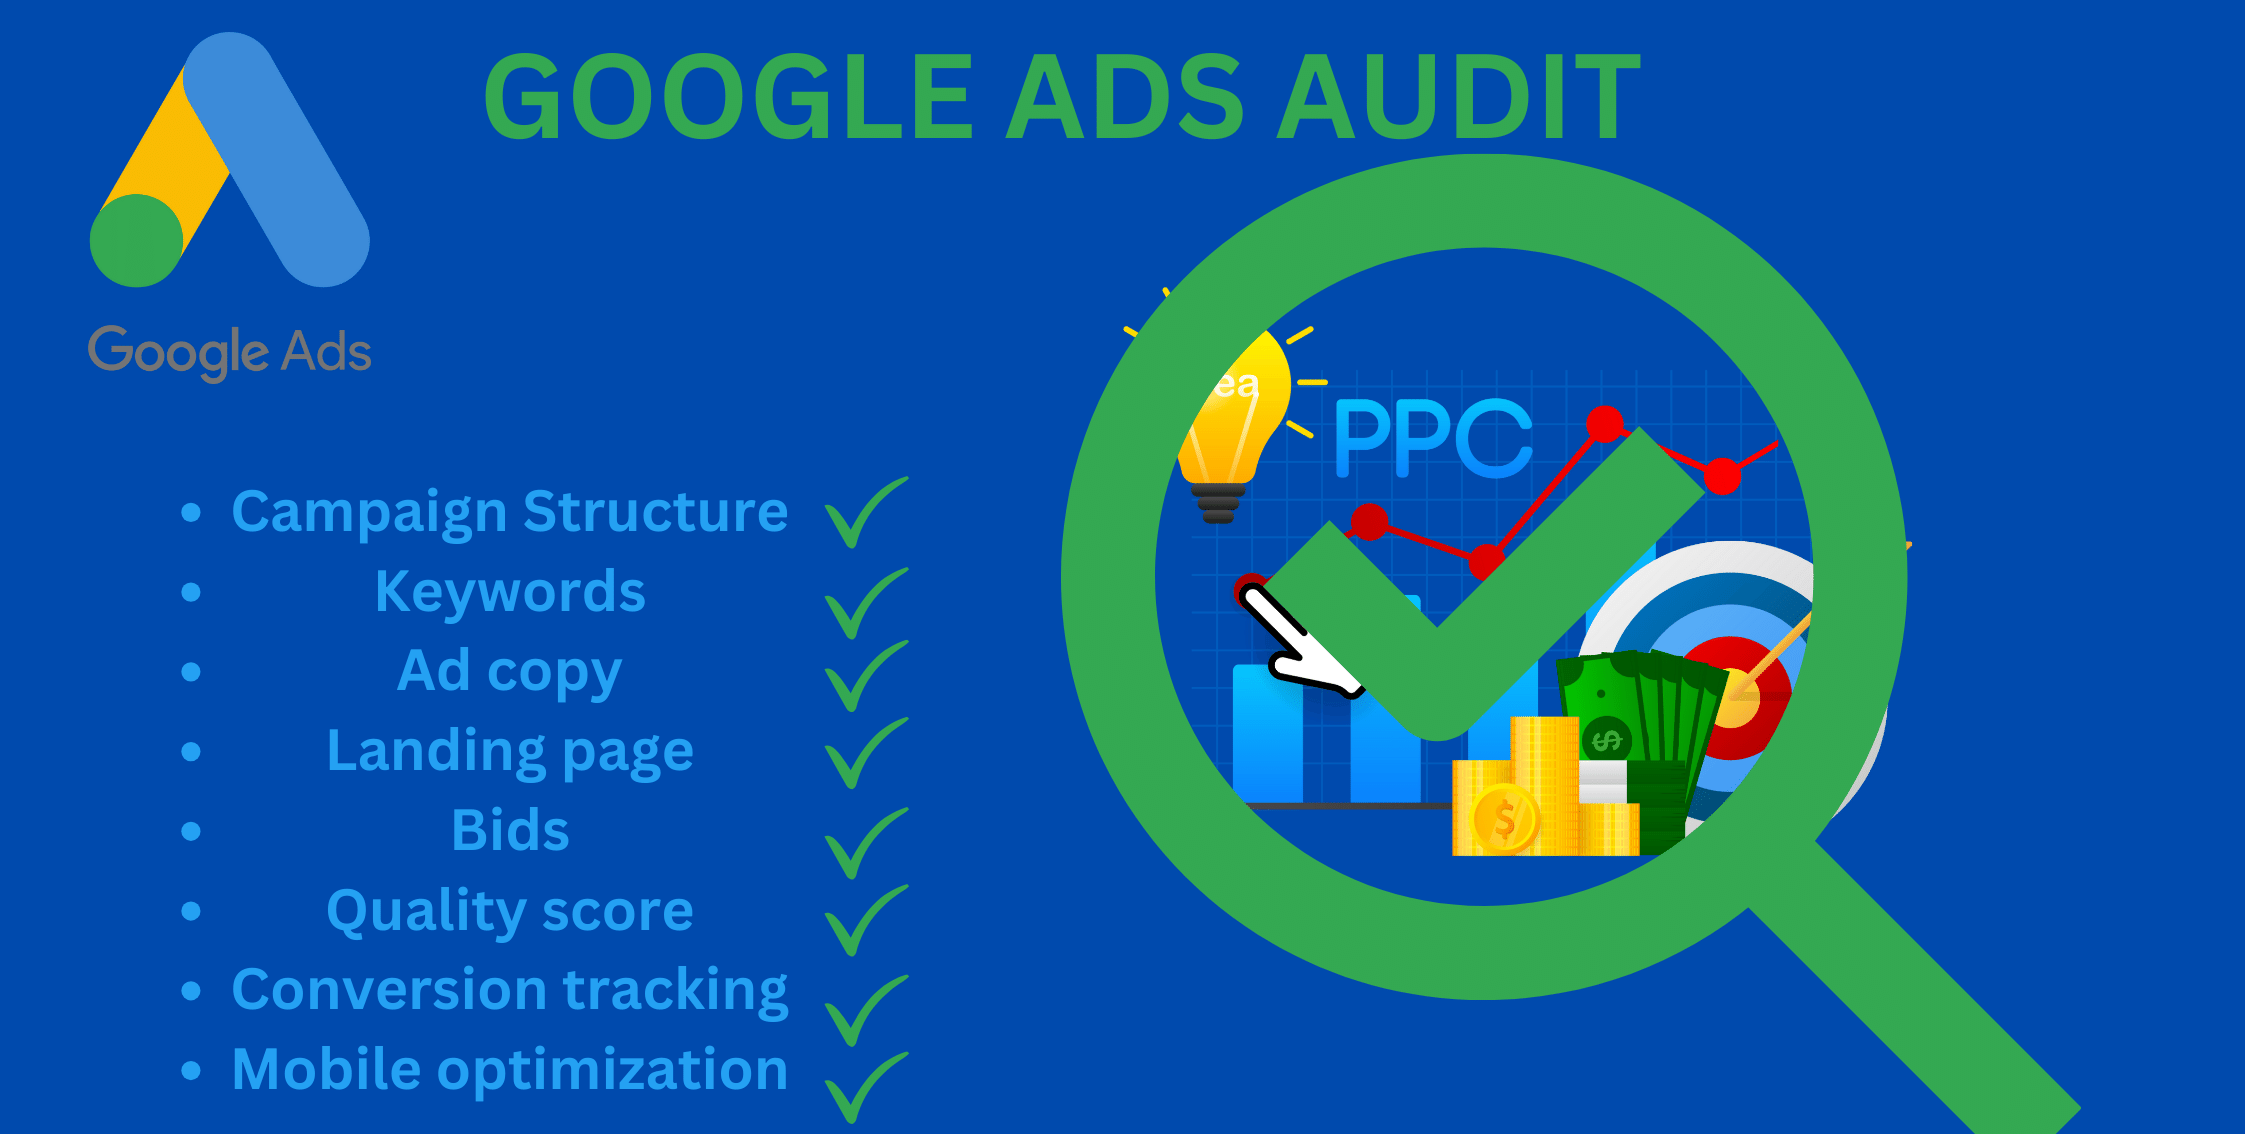 How to Audit your Google Ads Account